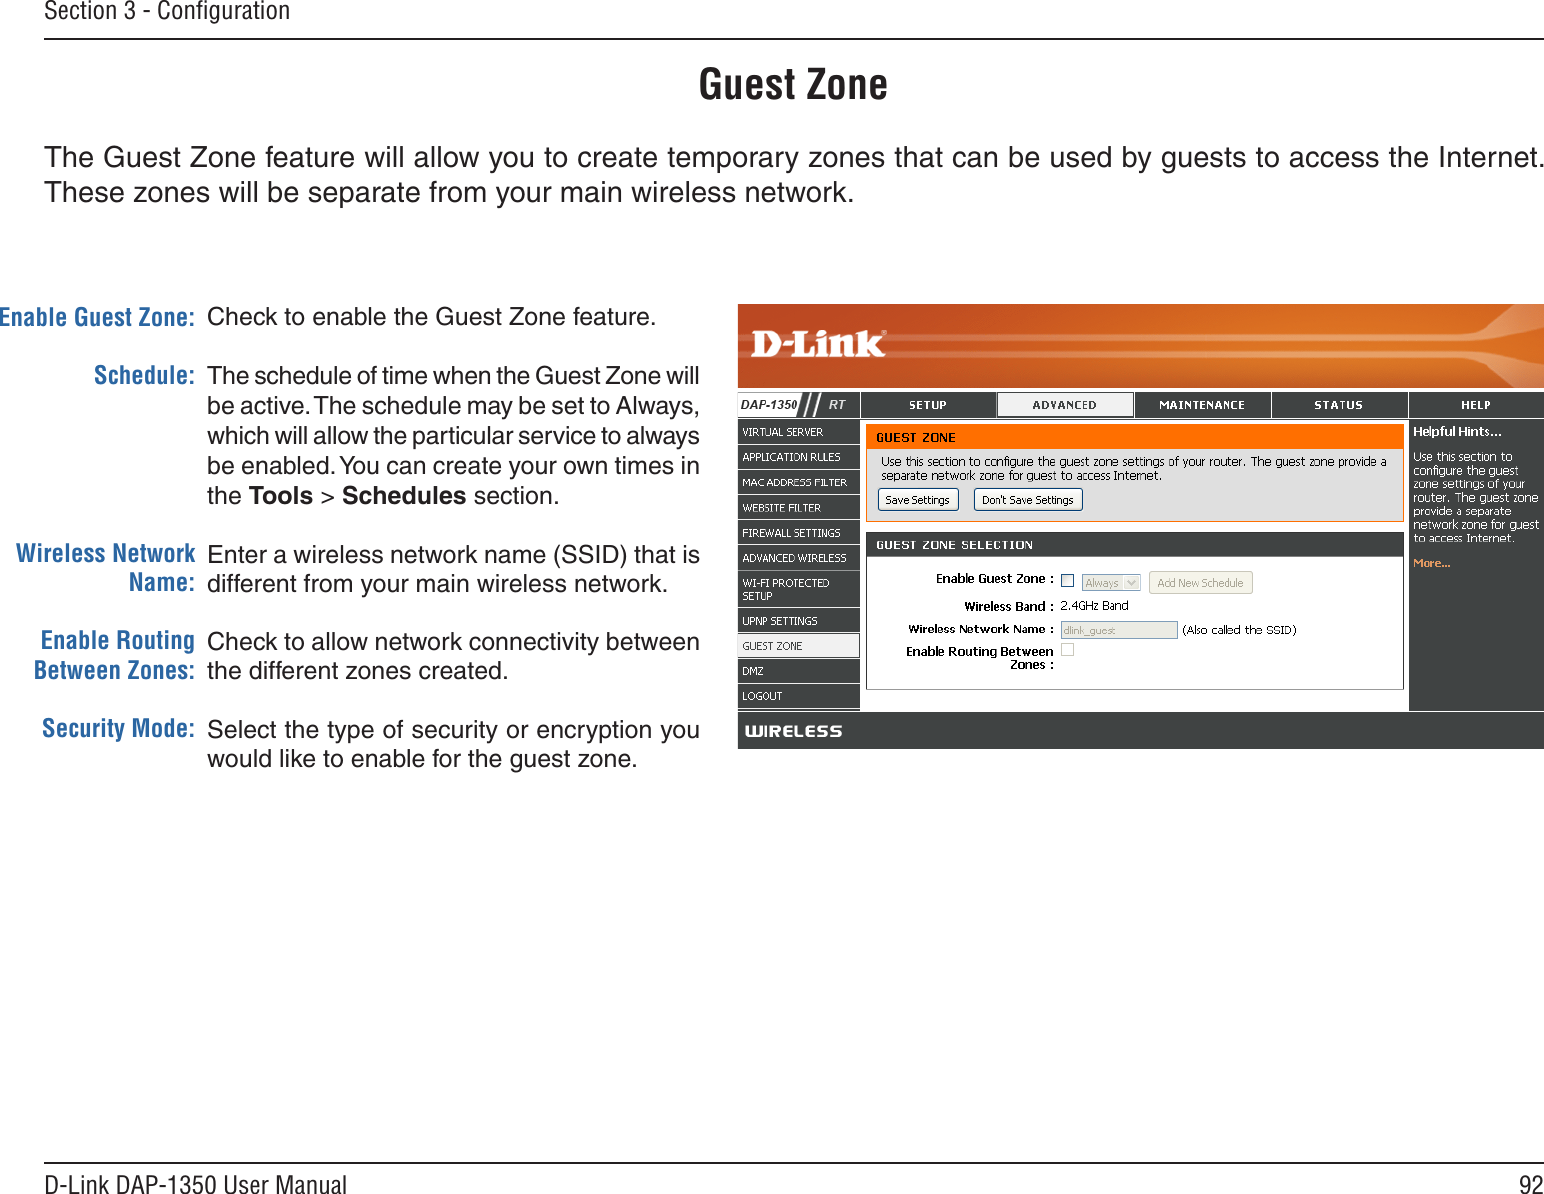 92D-Link DAP-1350 User ManualSection 3 - ConﬁgurationGuest ZoneCheck to enable the Guest Zone feature. The schedule of time when the Guest Zone will be active. The schedule may be set to Always, which will allow the particular service to always be enabled. You can create your own times in the Tools &gt; Schedules section.Enter a wireless network name (SSID) that is different from your main wireless network.Check to allow network connectivity between the different zones created. Select the type of security or encryption you would like to enable for the guest zone.  Enable Guest Zone:Schedule:Wireless Network Name:Enable Routing Between Zones:Security Mode:The Guest Zone feature will allow you to create temporary zones that can be used by guests to access the Internet. These zones will be separate from your main wireless network. 